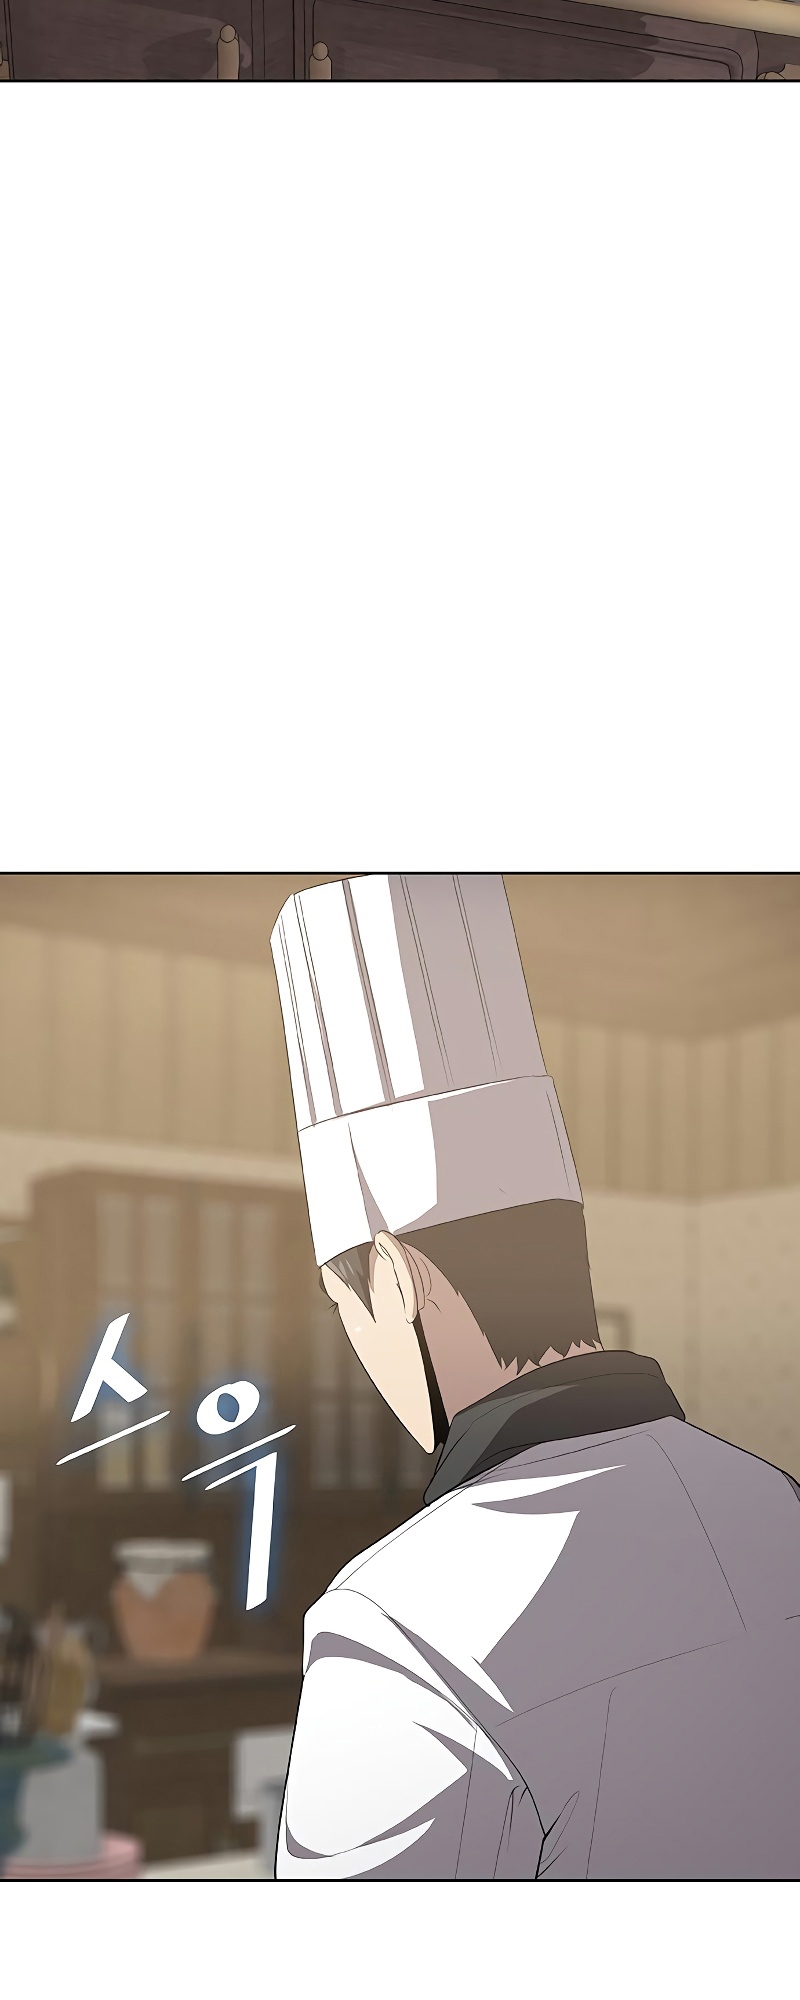 The Strongest Chef in Another World 12 16 04 25670051